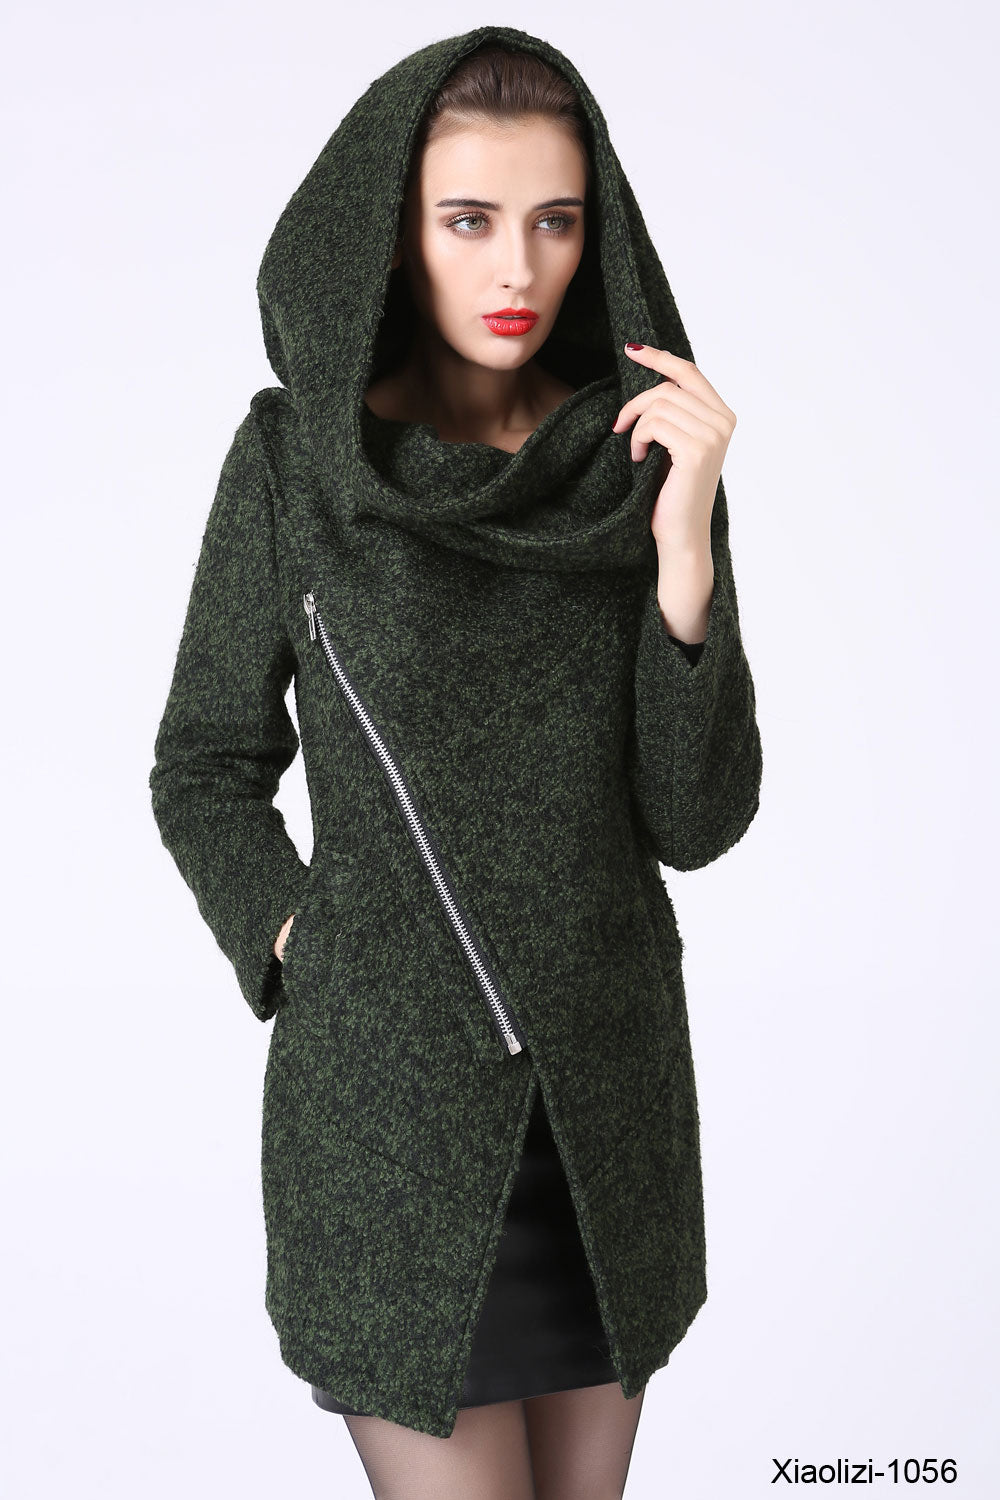 Modern Mini Wool jacket with Asymmetrical Front Zipper and Snood Hood 1056